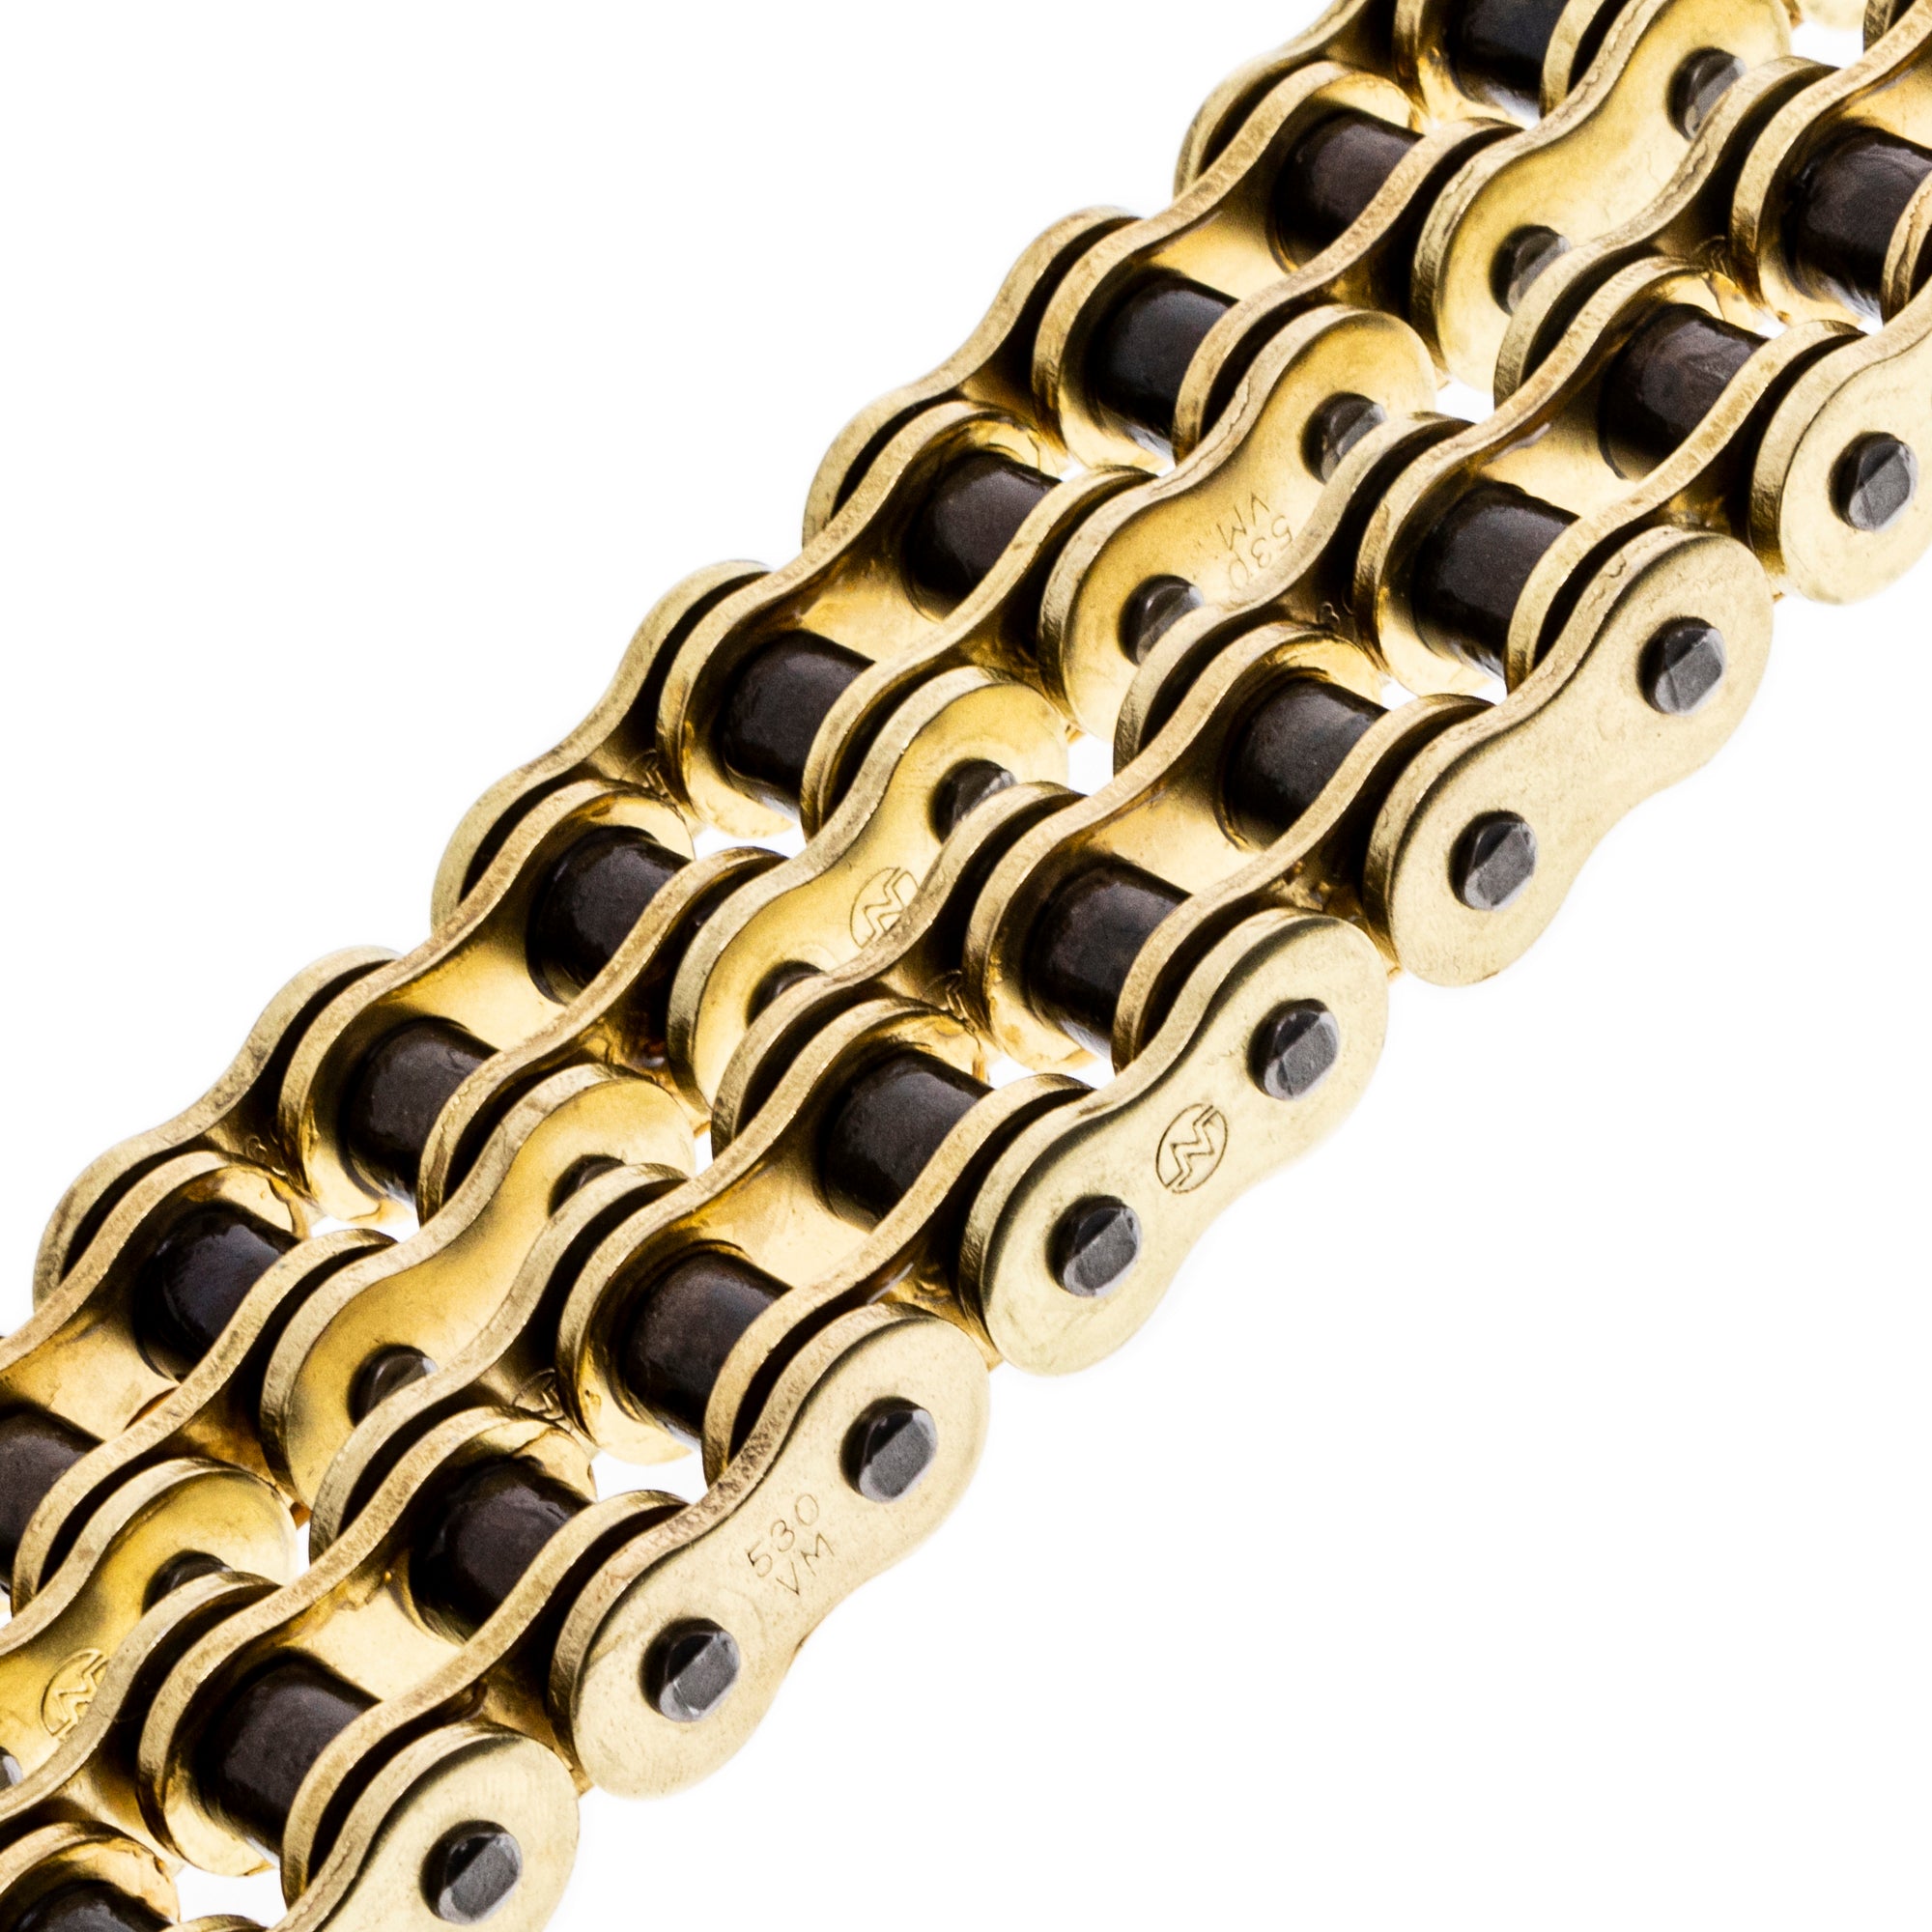 Gold X-Ring Chain 92 w/ Master Link for zOTHER RD350 RD250 94580-10092-00 NICHE 519-CDC2510H